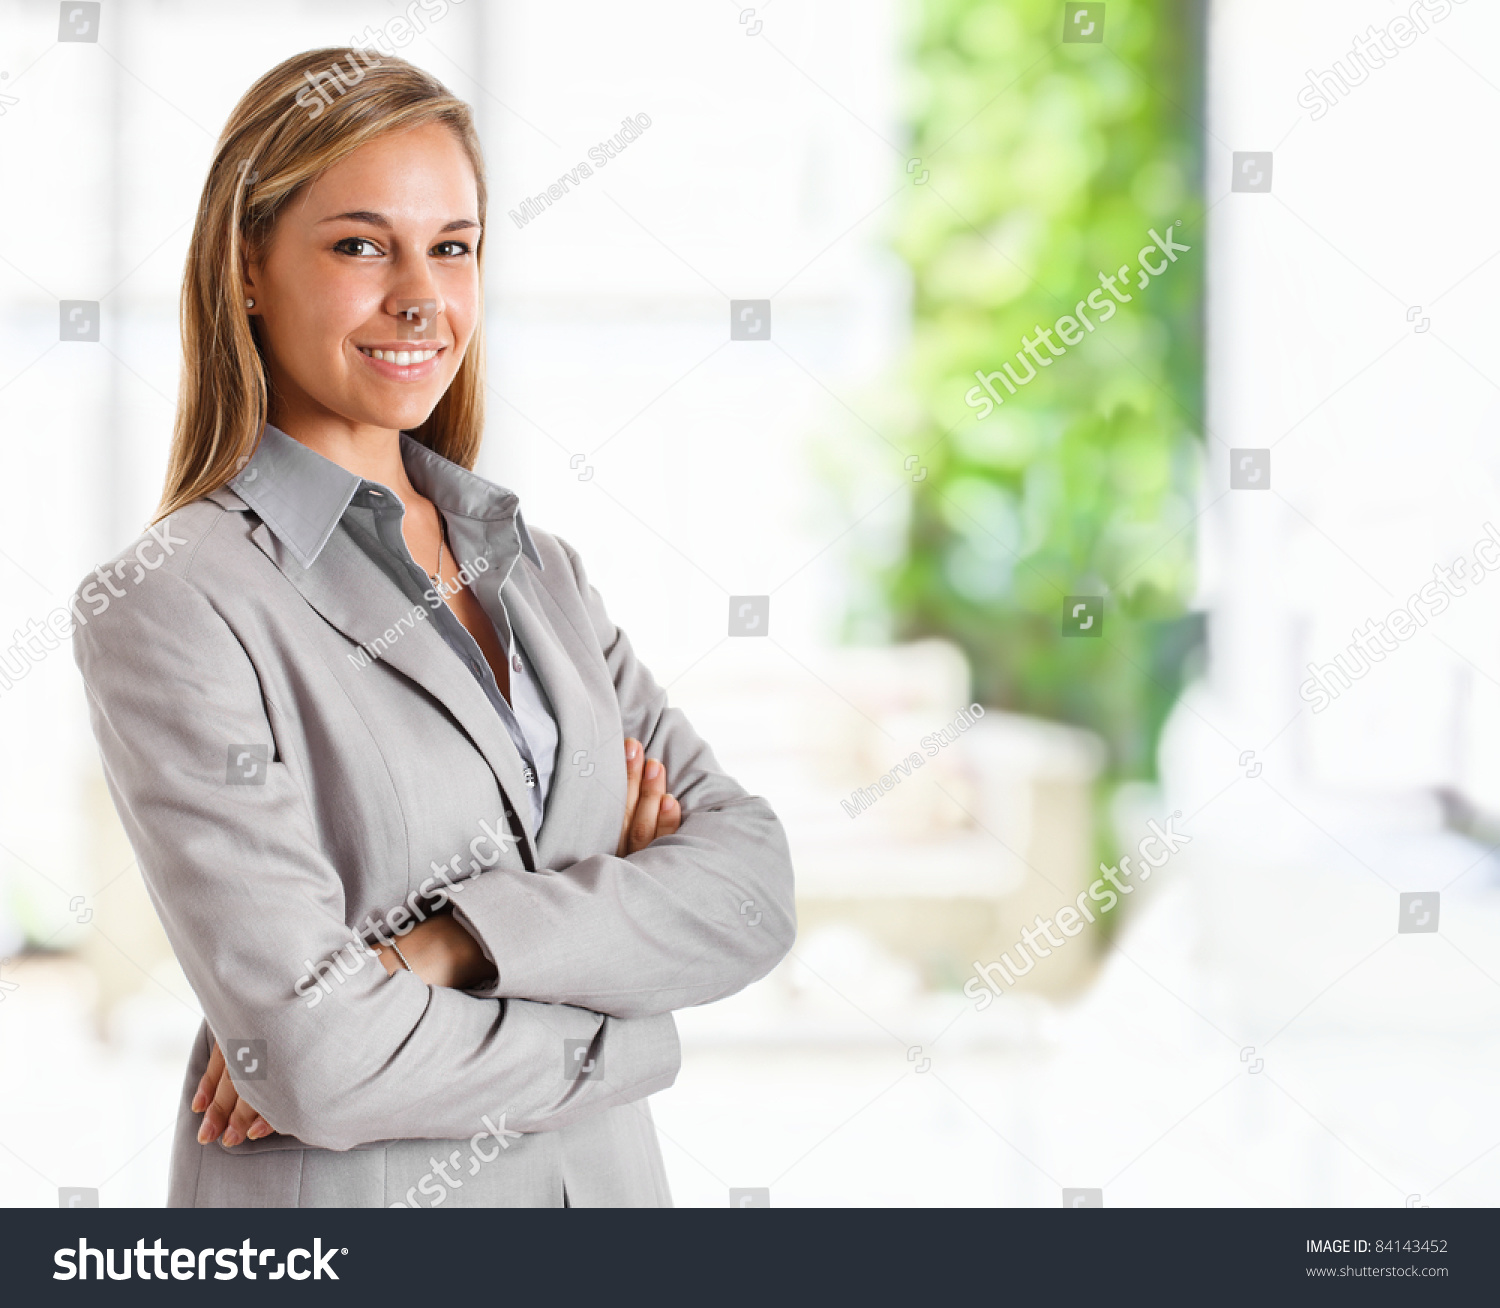 Portrait of a young smiling businesswoman #84143452